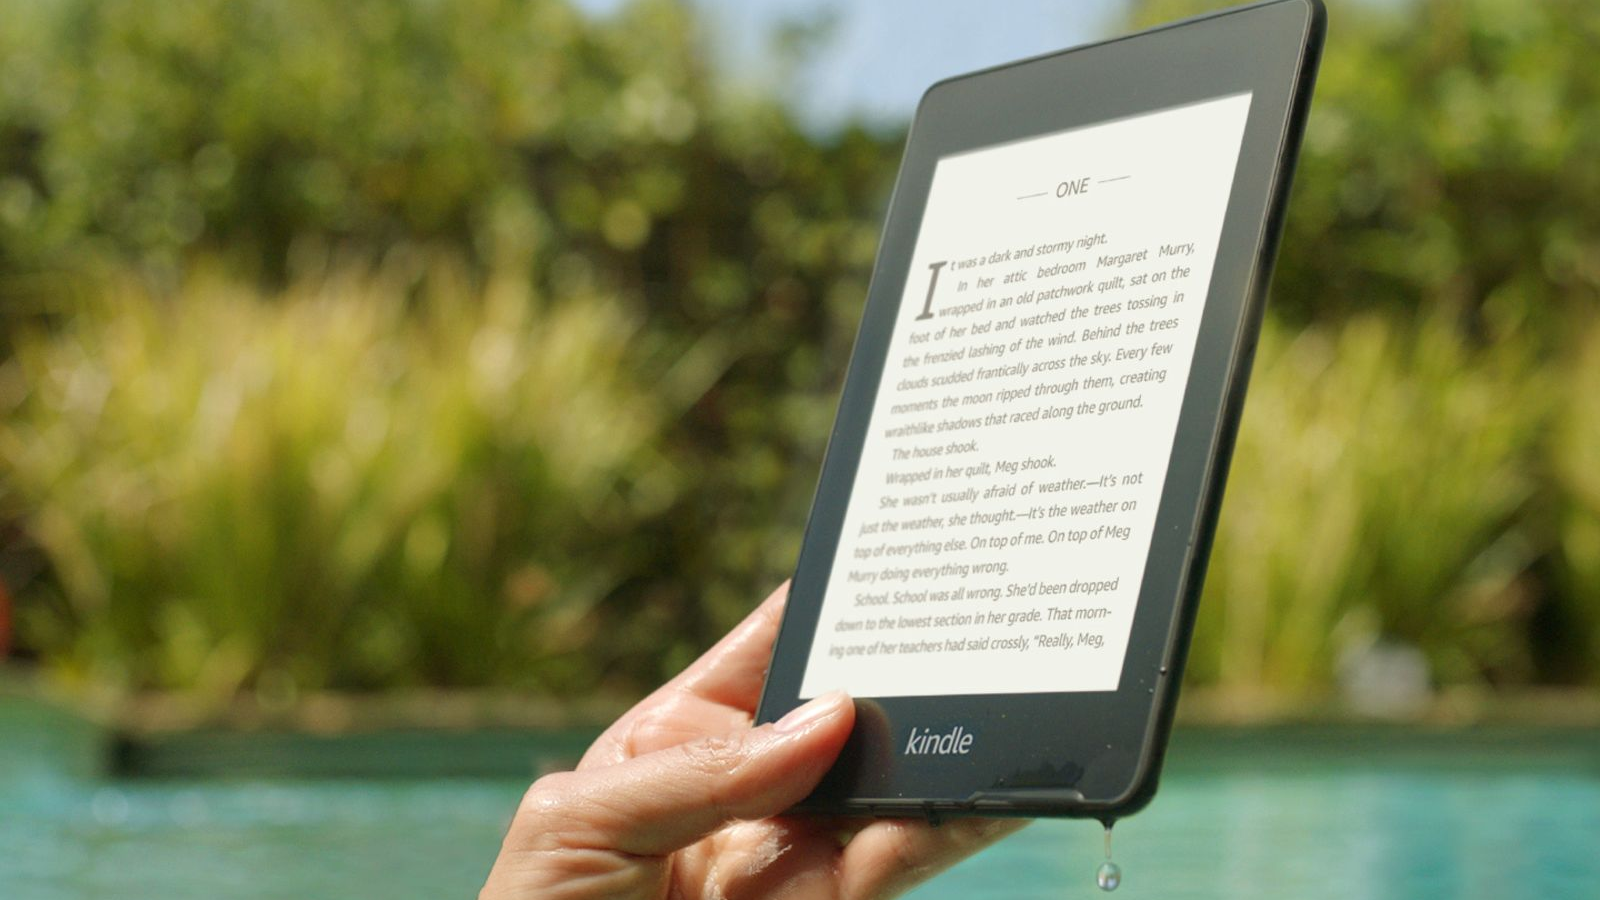 Get 3 Months of Kindle Unlimited for Just $1